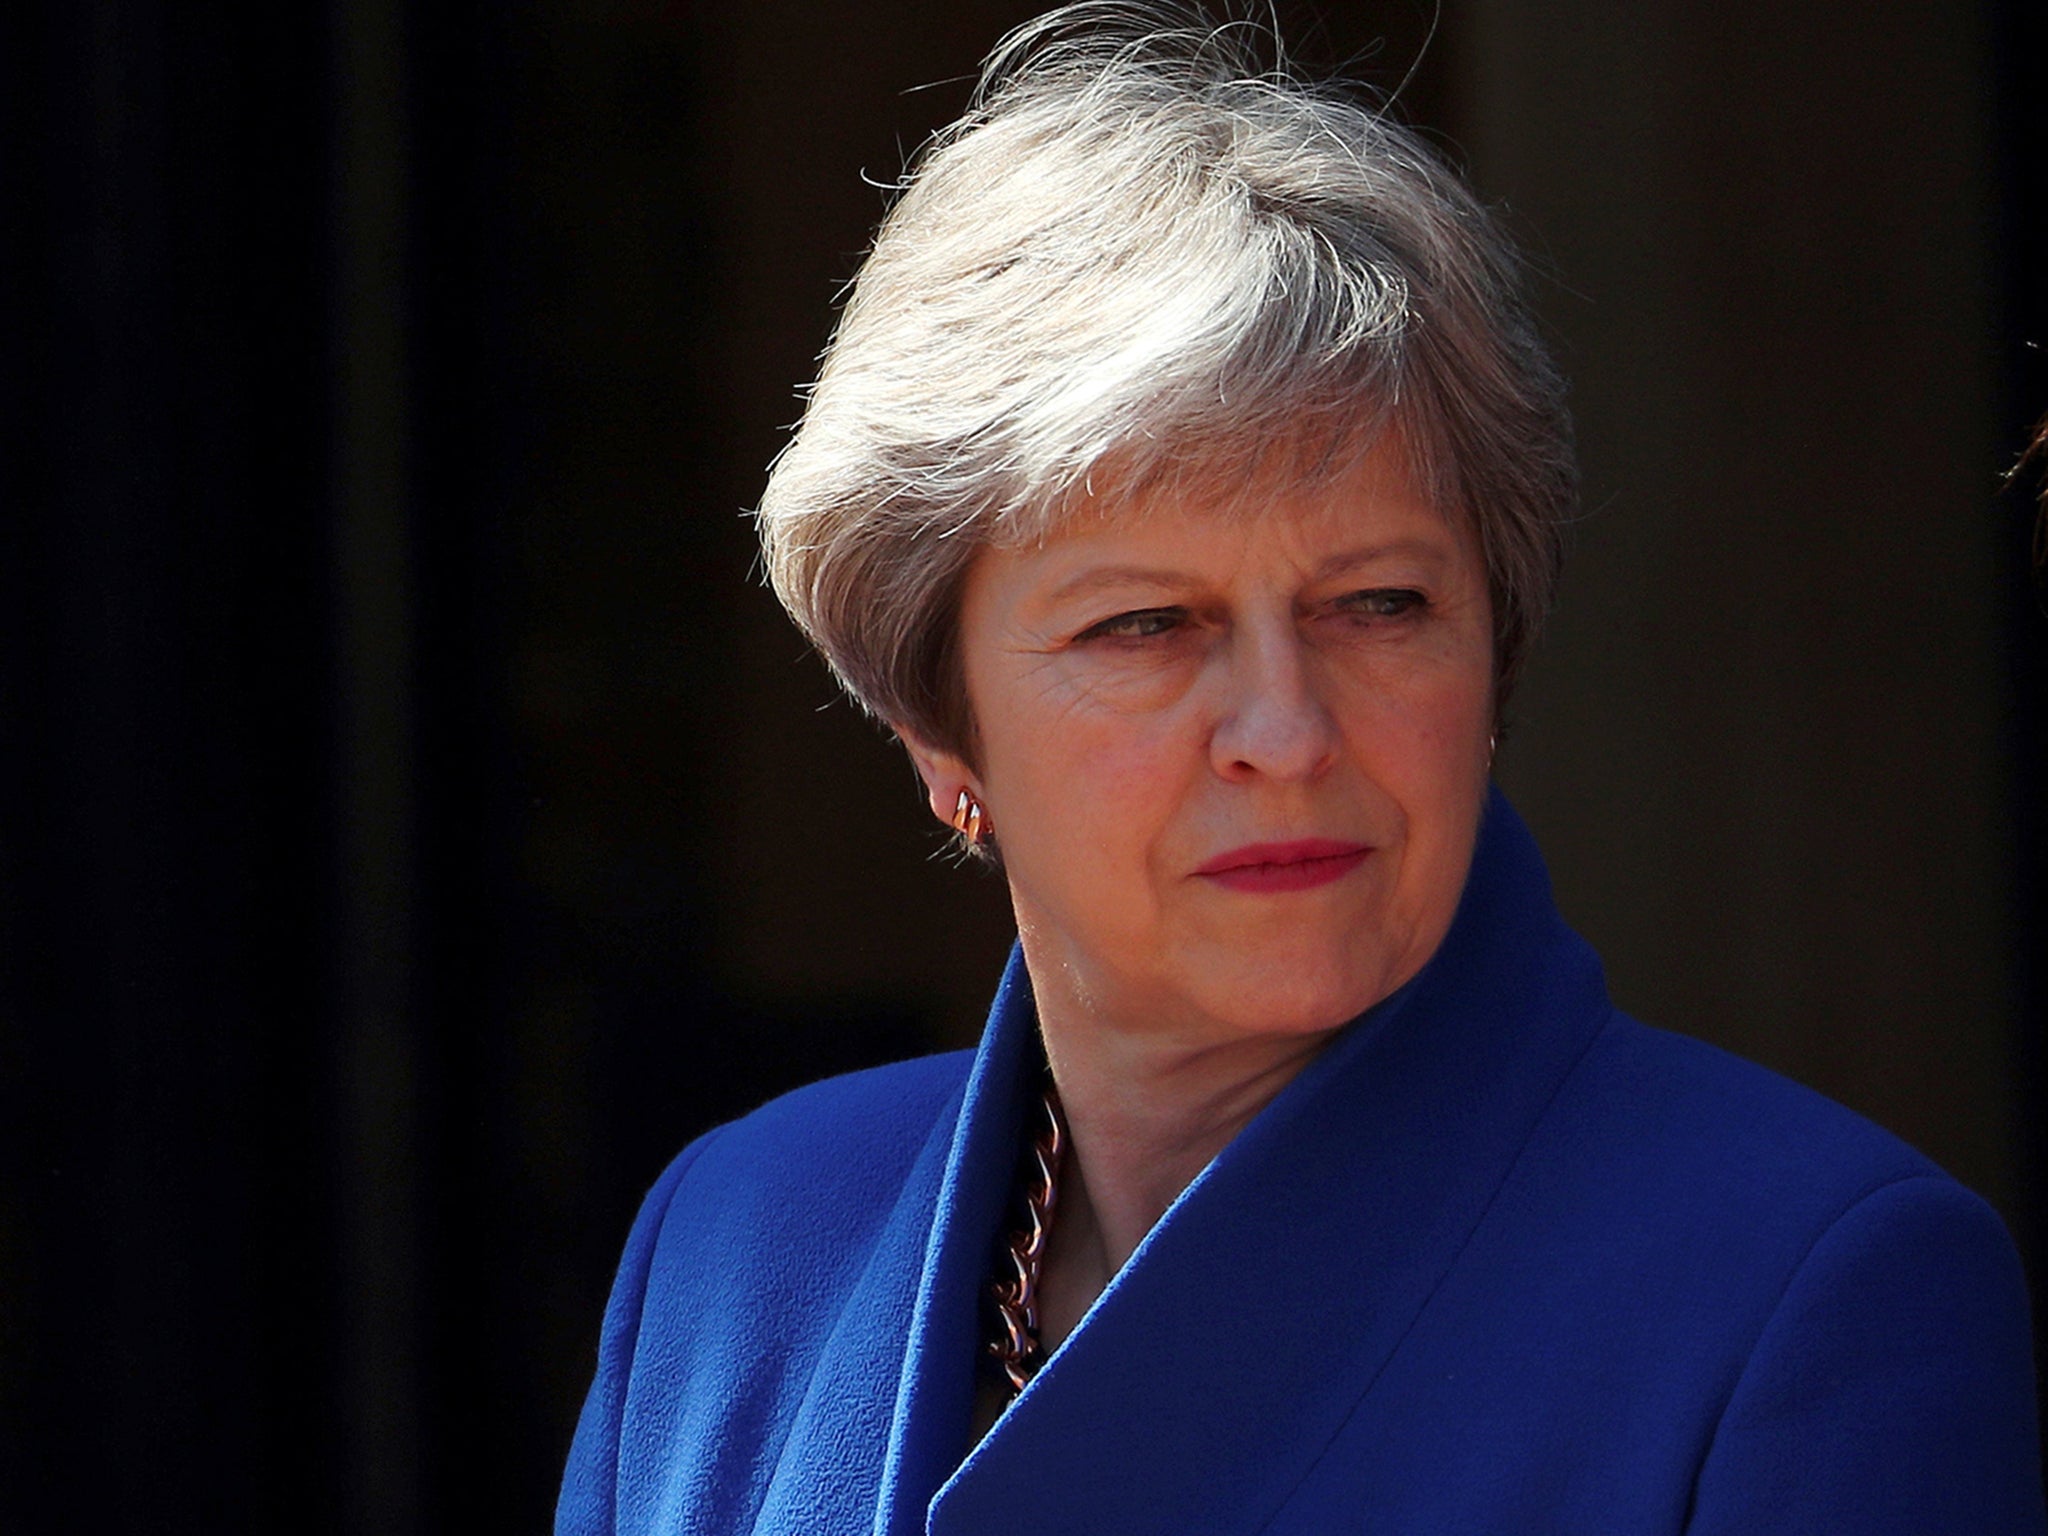 Theresa May refused the man's asylum claim in 2015 and wants him sent back to Afghanistan